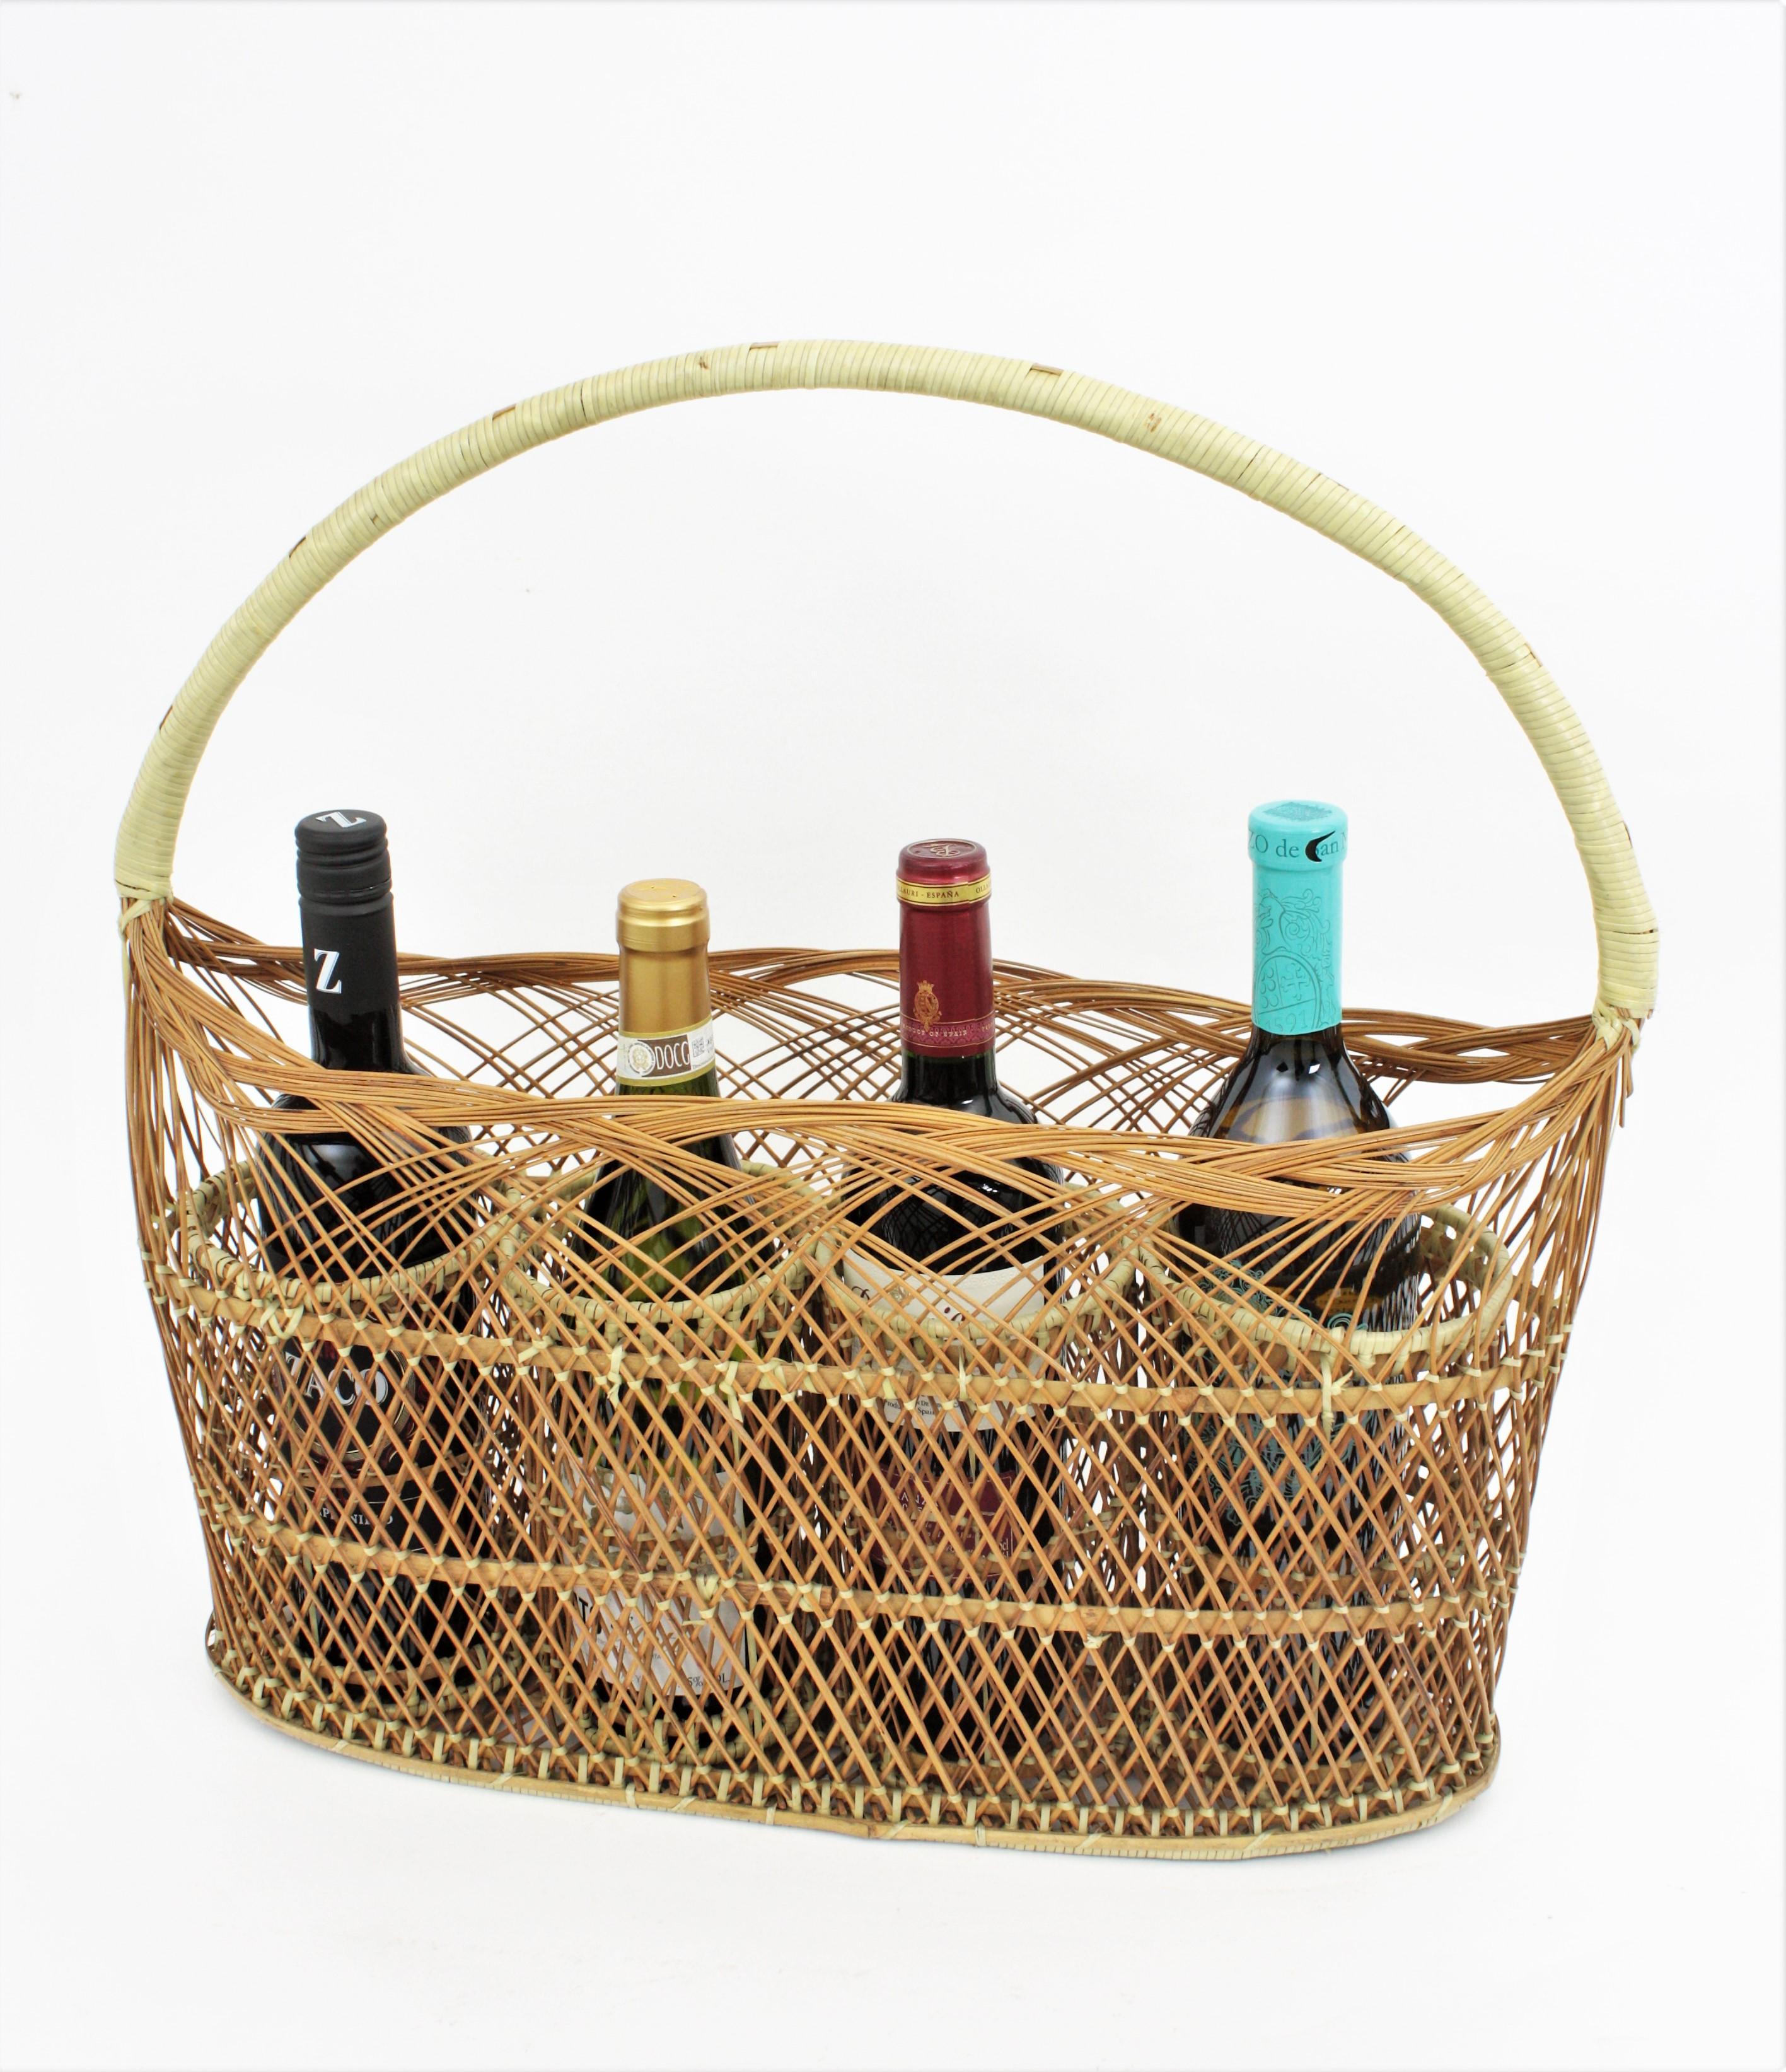 French bottle basket stand in hand-woven rattan and wicker, 1960s

Handcrafted woven wicker and rattan wine bottle rack or basket. It has a handle and 4 compartments.
This wine bottle rack is a shabby chic kitchen display stand with all the taste